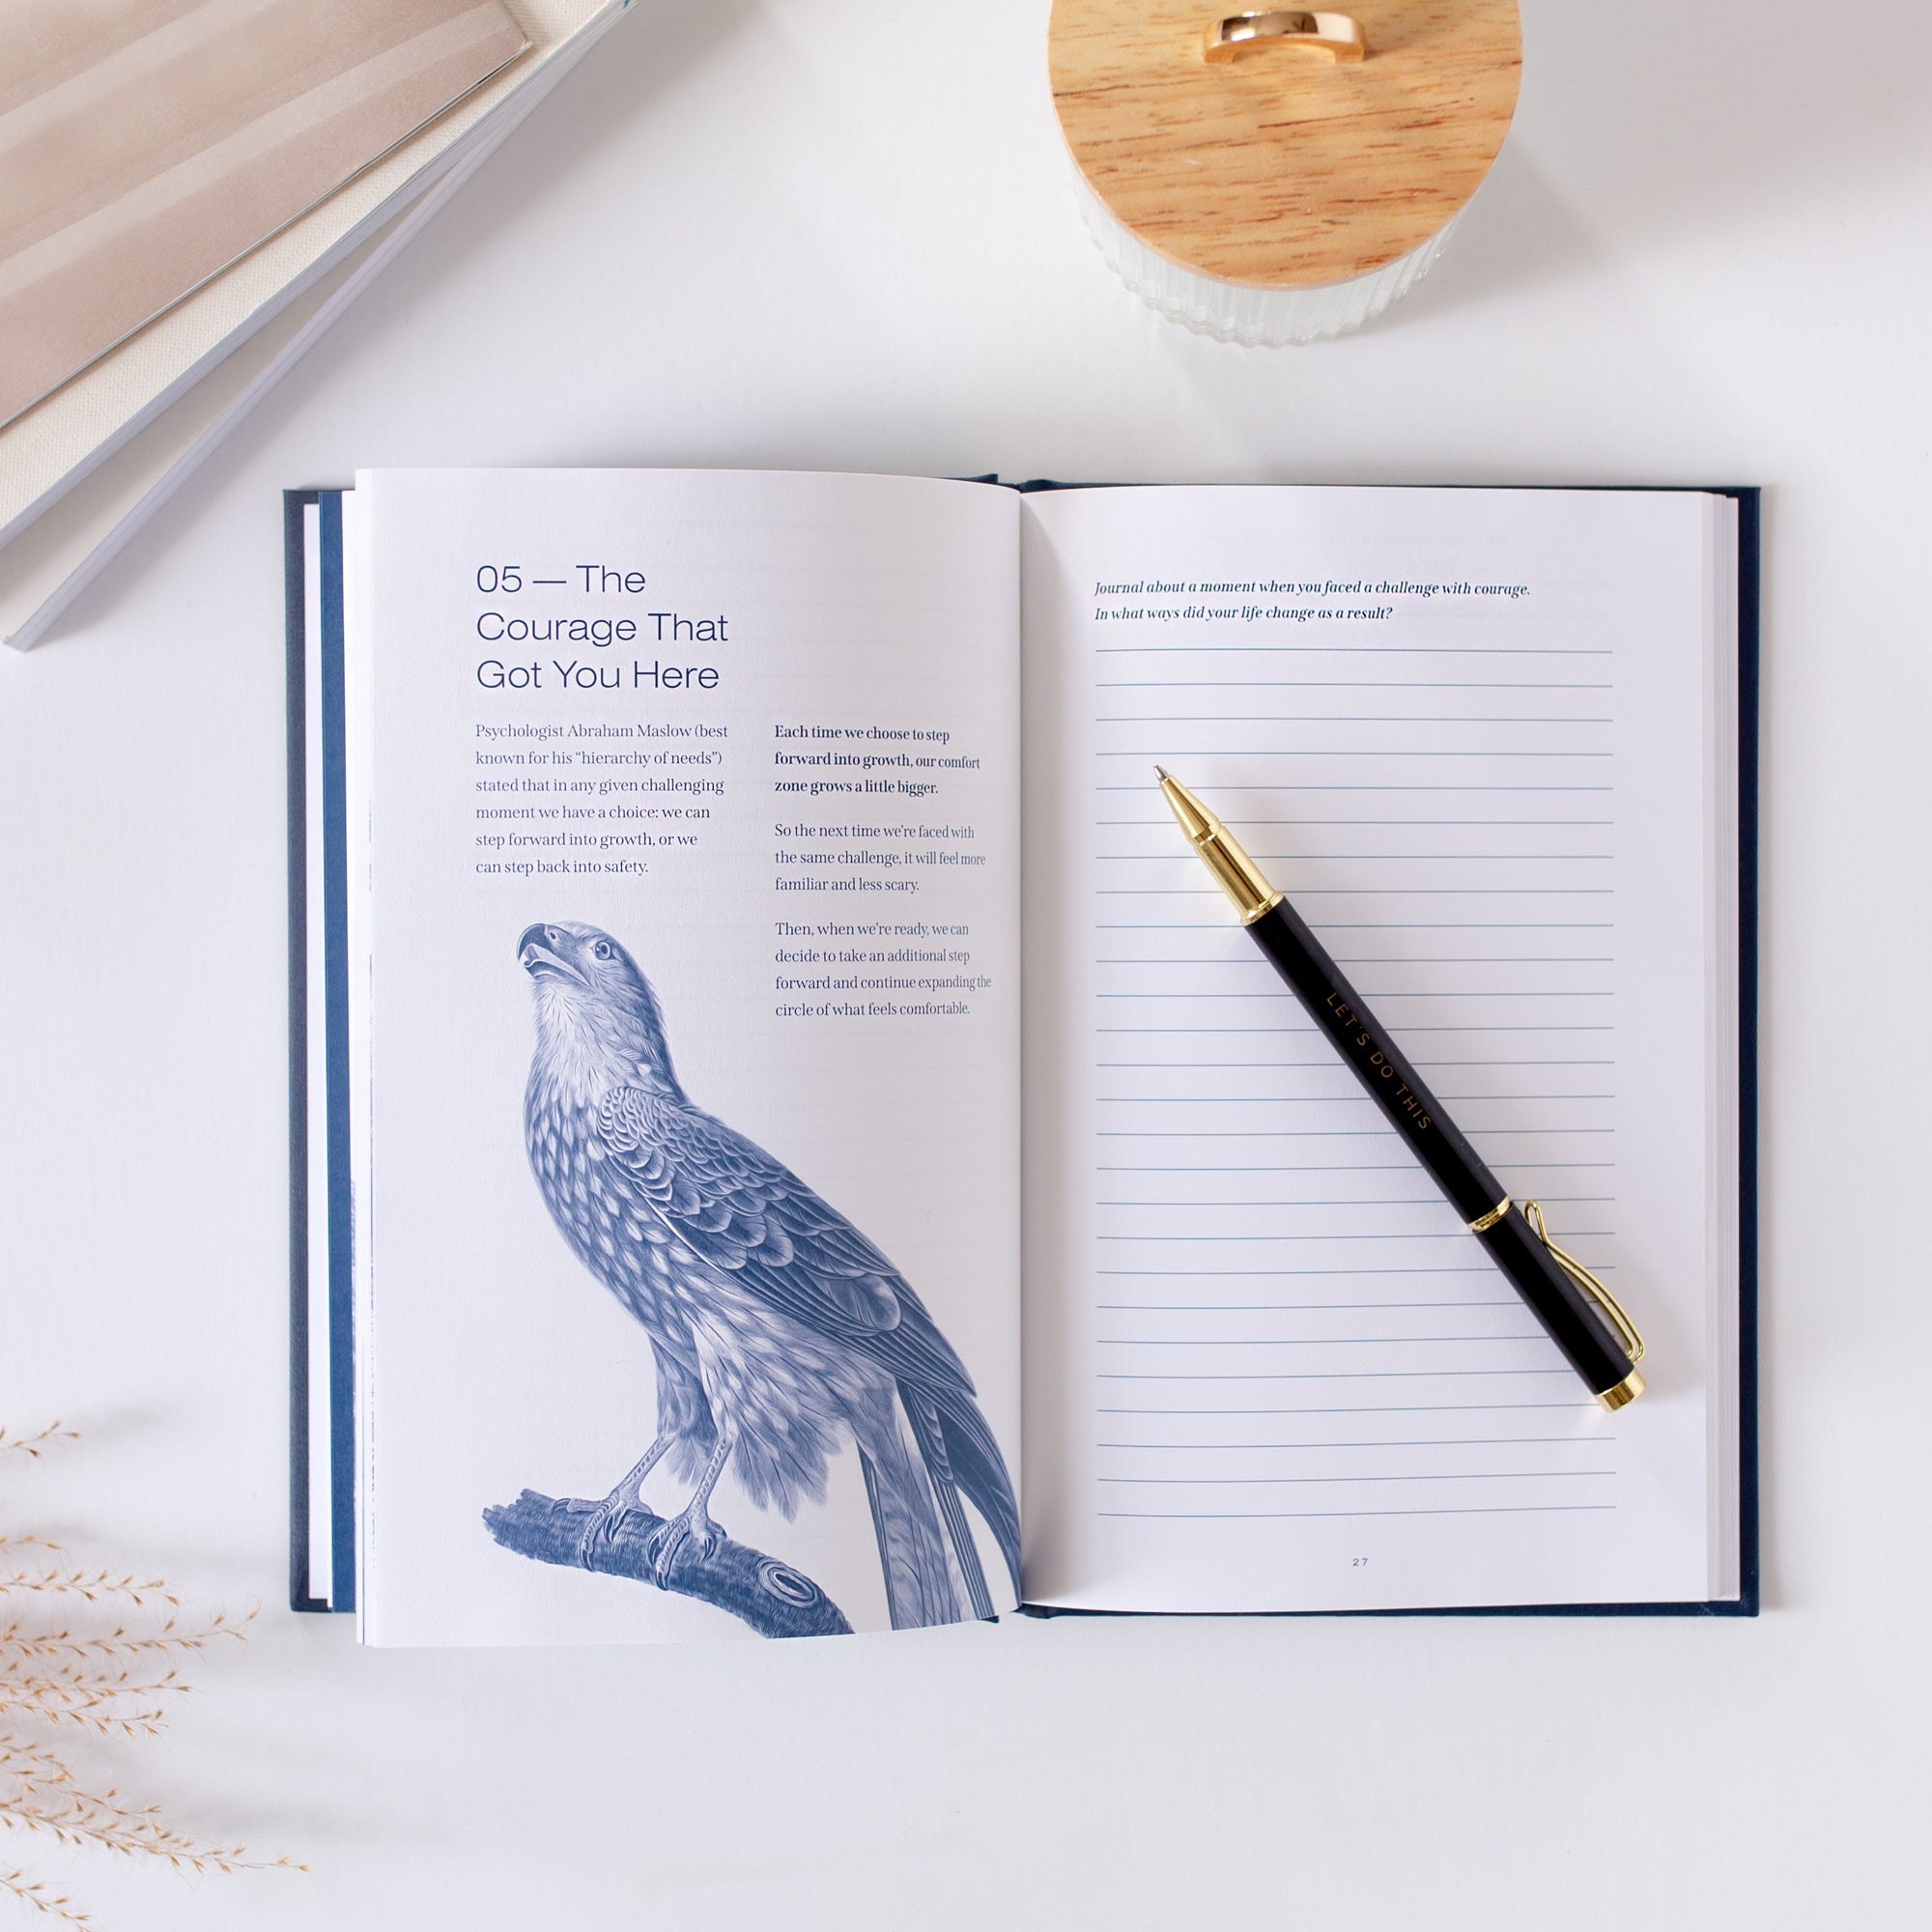 The Life Journal: How A Notebook & Pen Can Change Everything